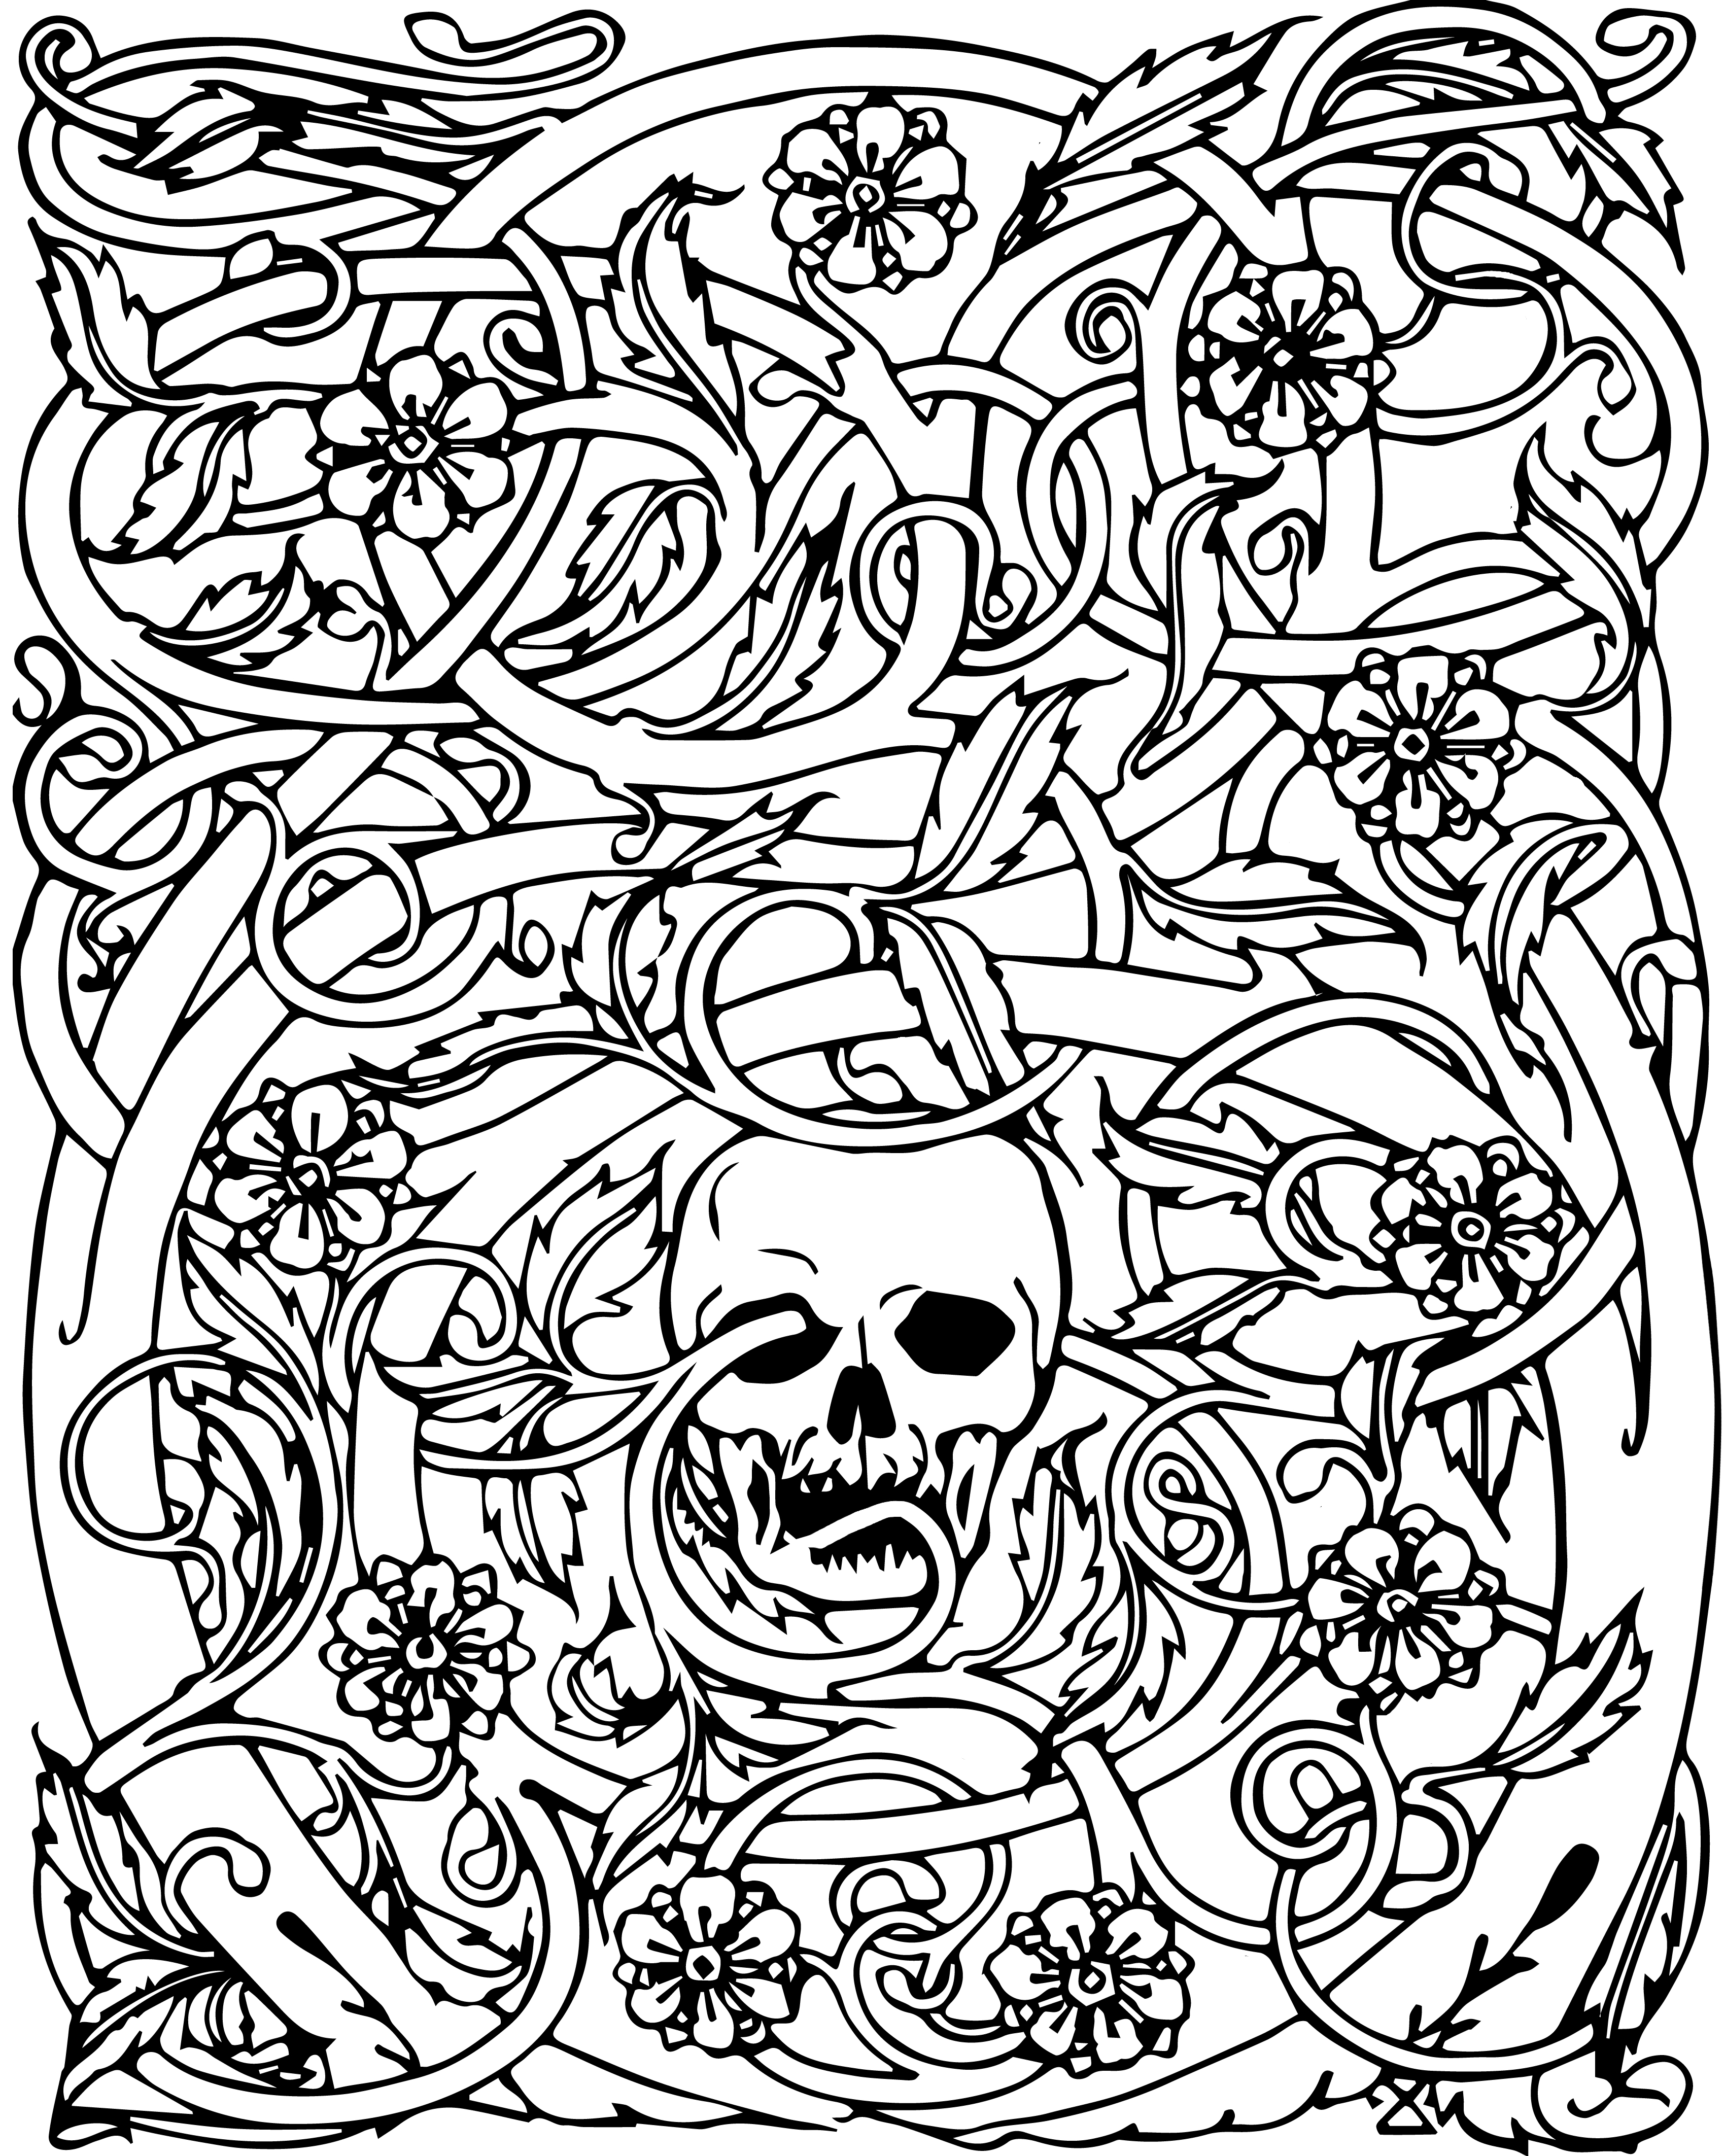 Coloring Pages For Adults Skulls At Free Printable Colorings Pages To Print 4029